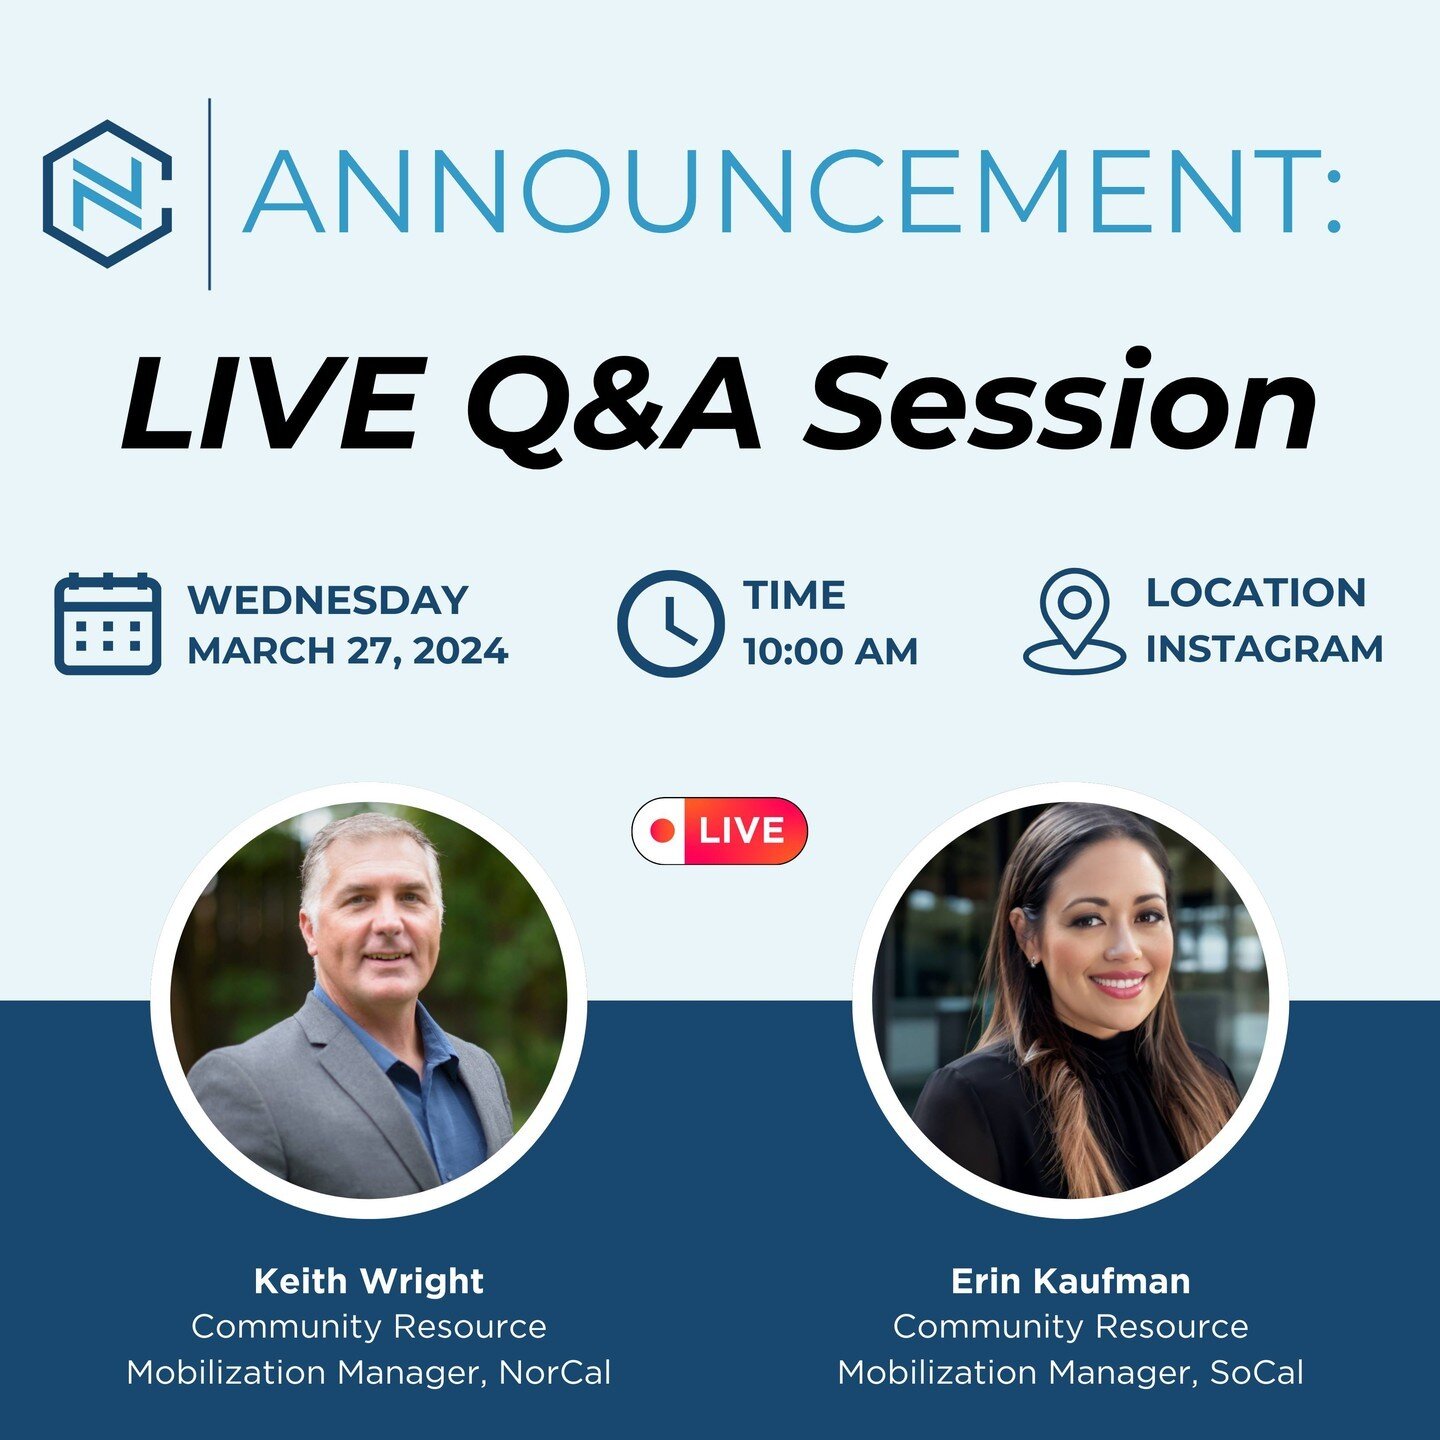 📣 Special Announcement 📣

Tune in TOMORROW at 10:00 AM PST for a LIVE Q&amp;A Session right here on Instagram.

This is an opportunity for you to learn more about how to get involved with City Net and be a champion for our mission. We will also sha